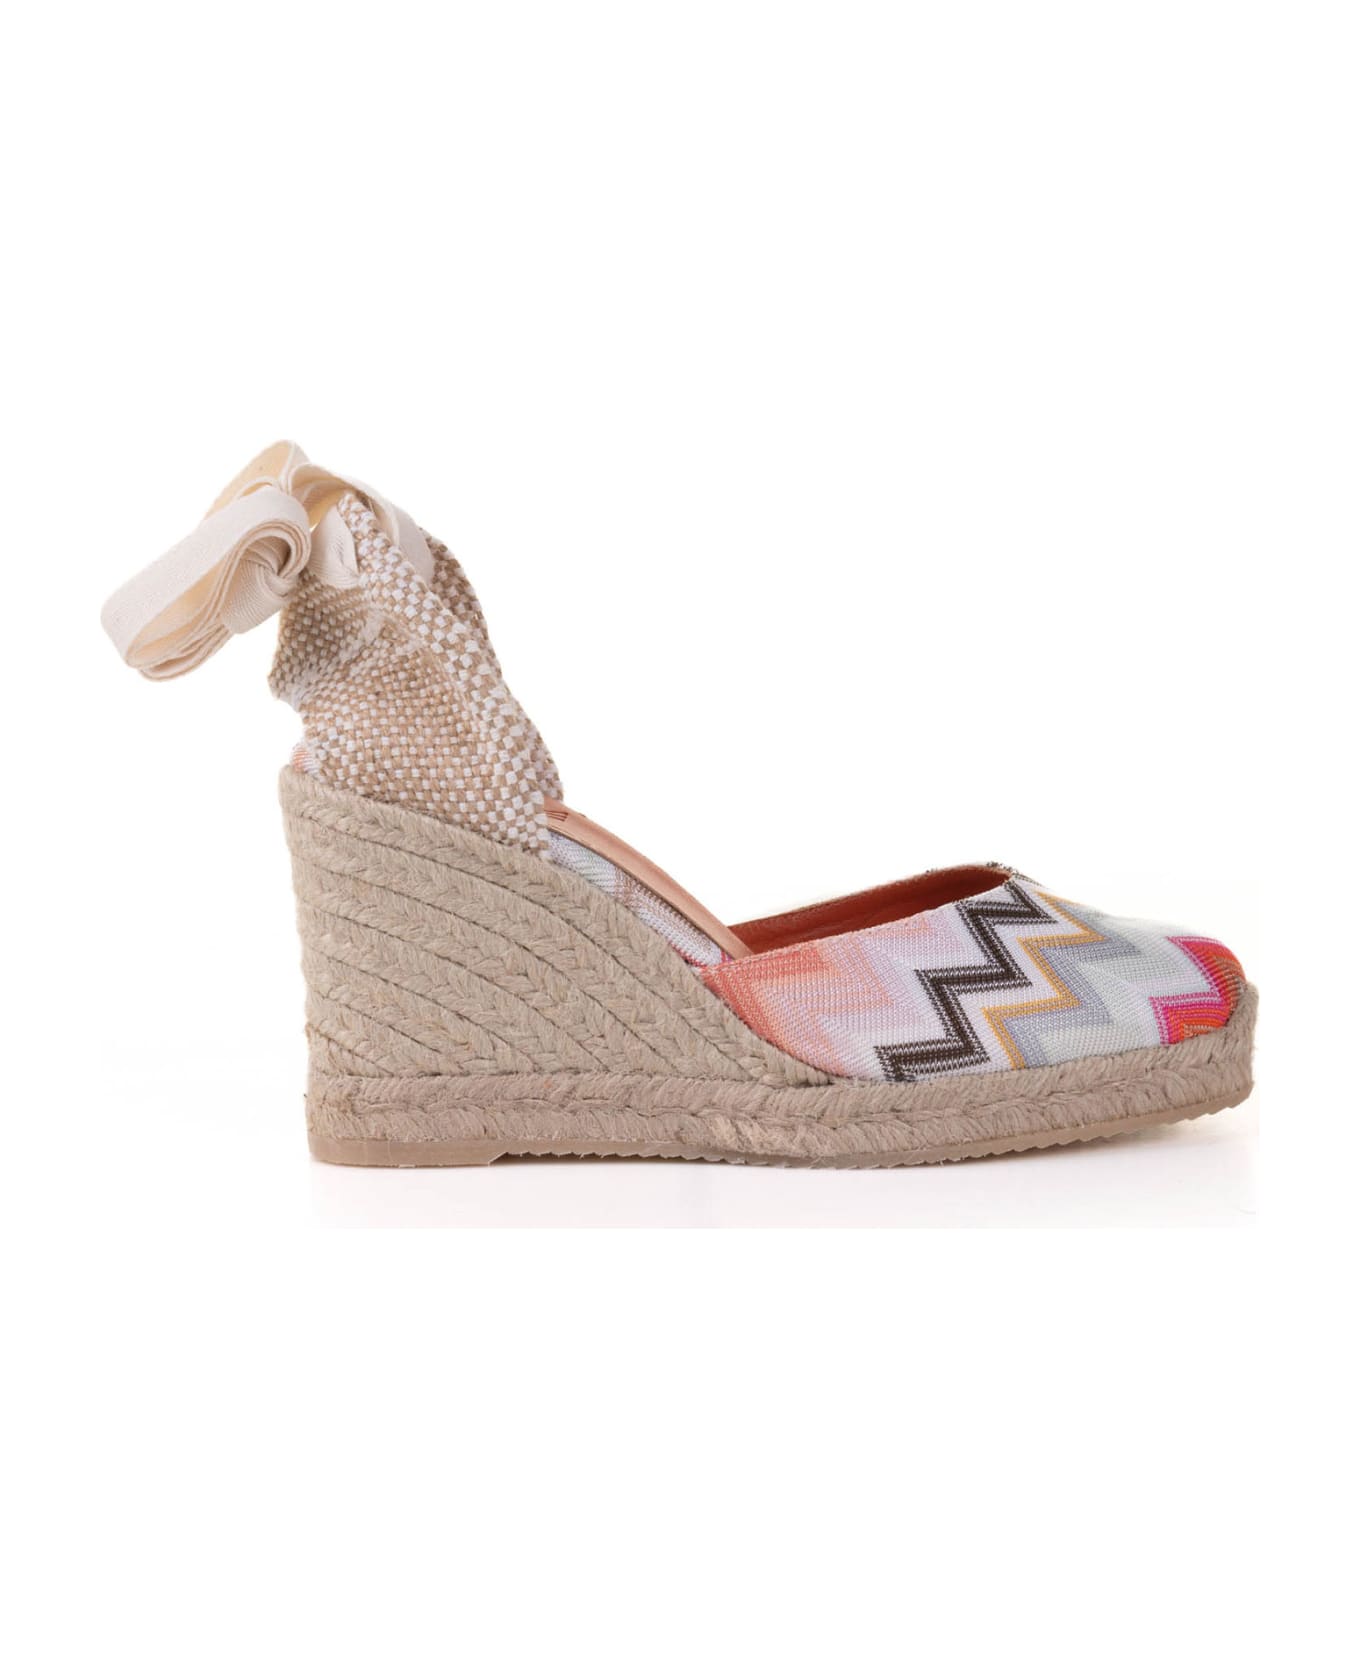 Missoni Espadrilles In Chevron Fabric With Wedge And Ankle Laces - PINK